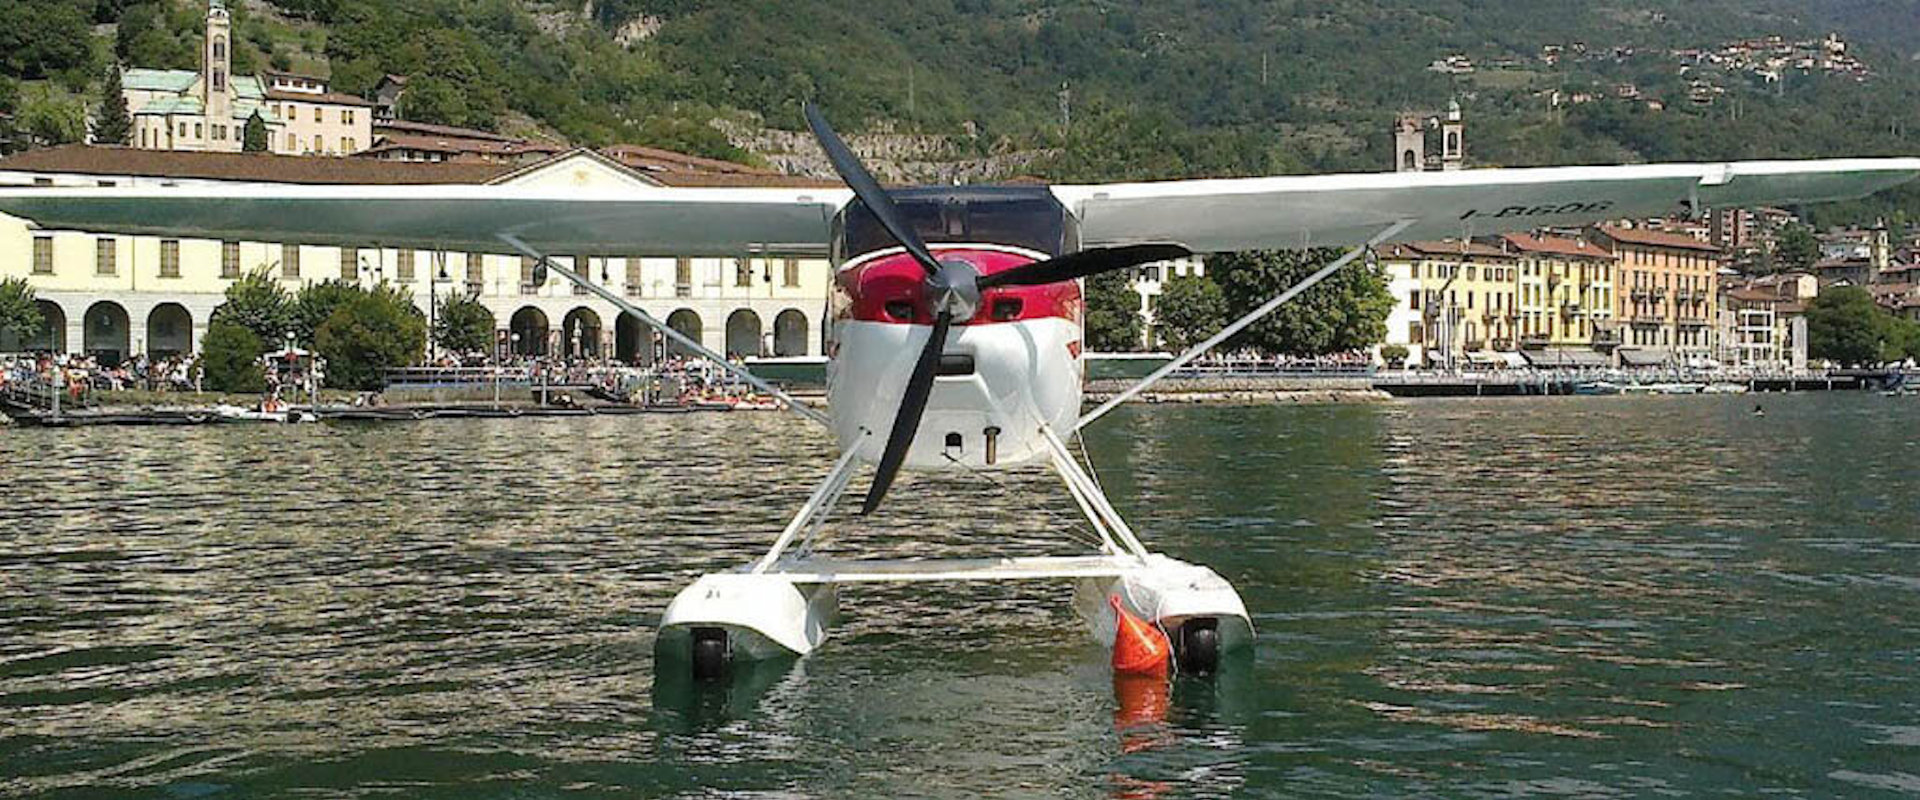 Amphibious aircraft in Italy